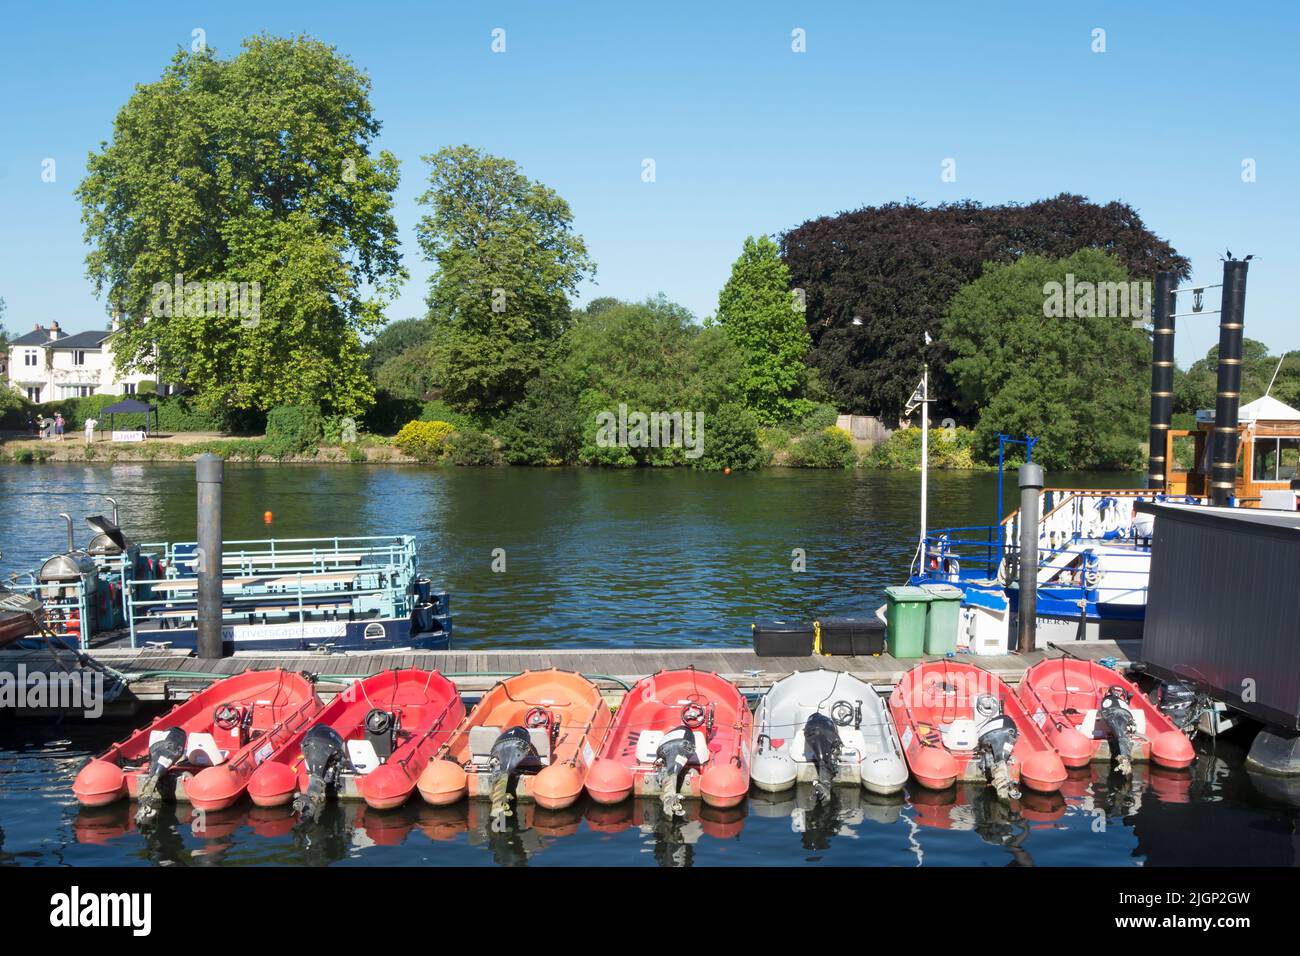 row of self-drive boats for hire, from the company riverscapes, moored on the river thames at kingston upon thames, surrey, england Stock Photo